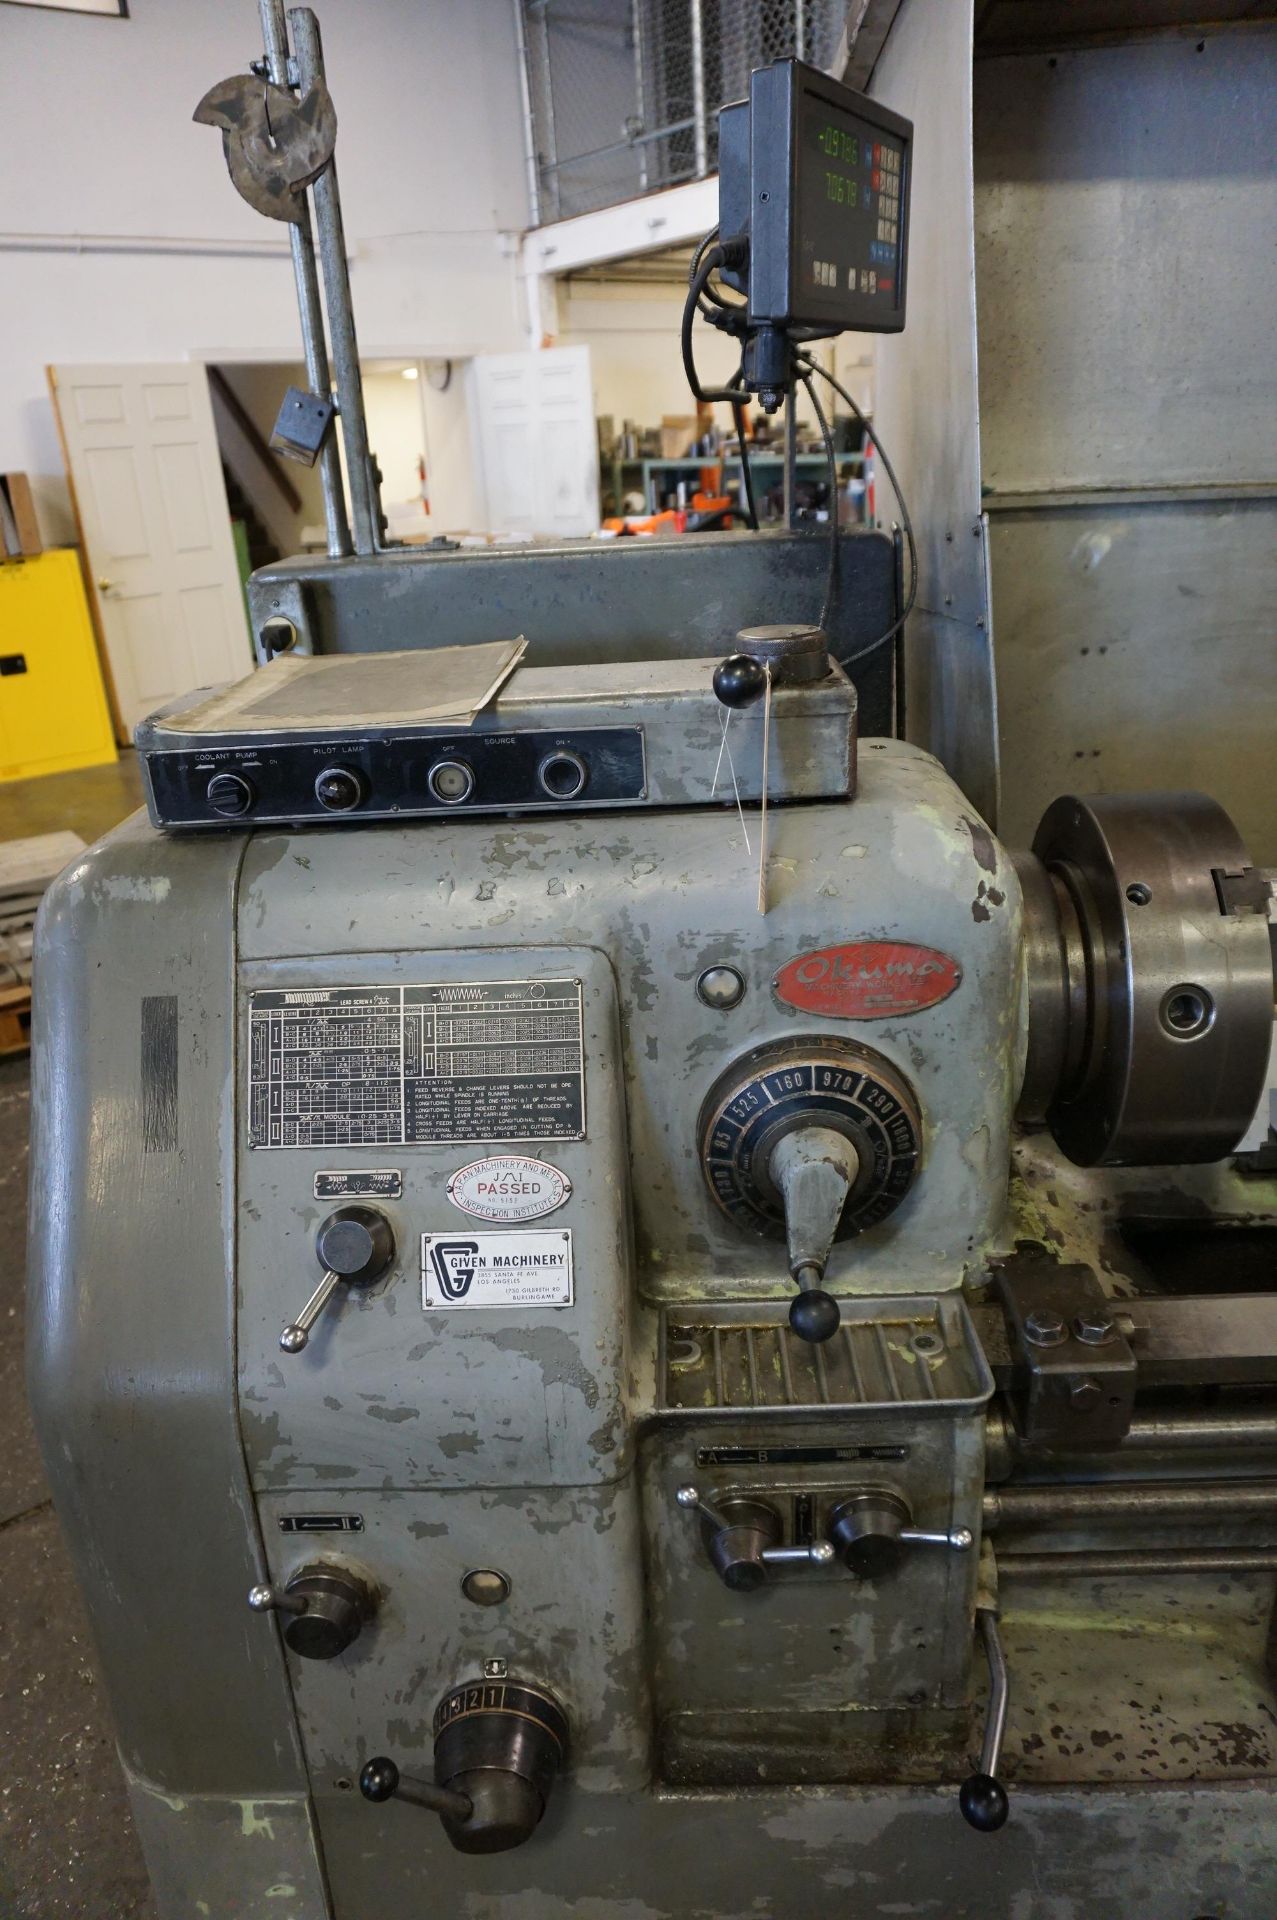 OKUMA LS 16” x 47” SWING, S/N 4012-8916 WITH NEWALL TOPAZ DRO, WITH CATALOG, CHUCK, AND TOOL - Image 3 of 8